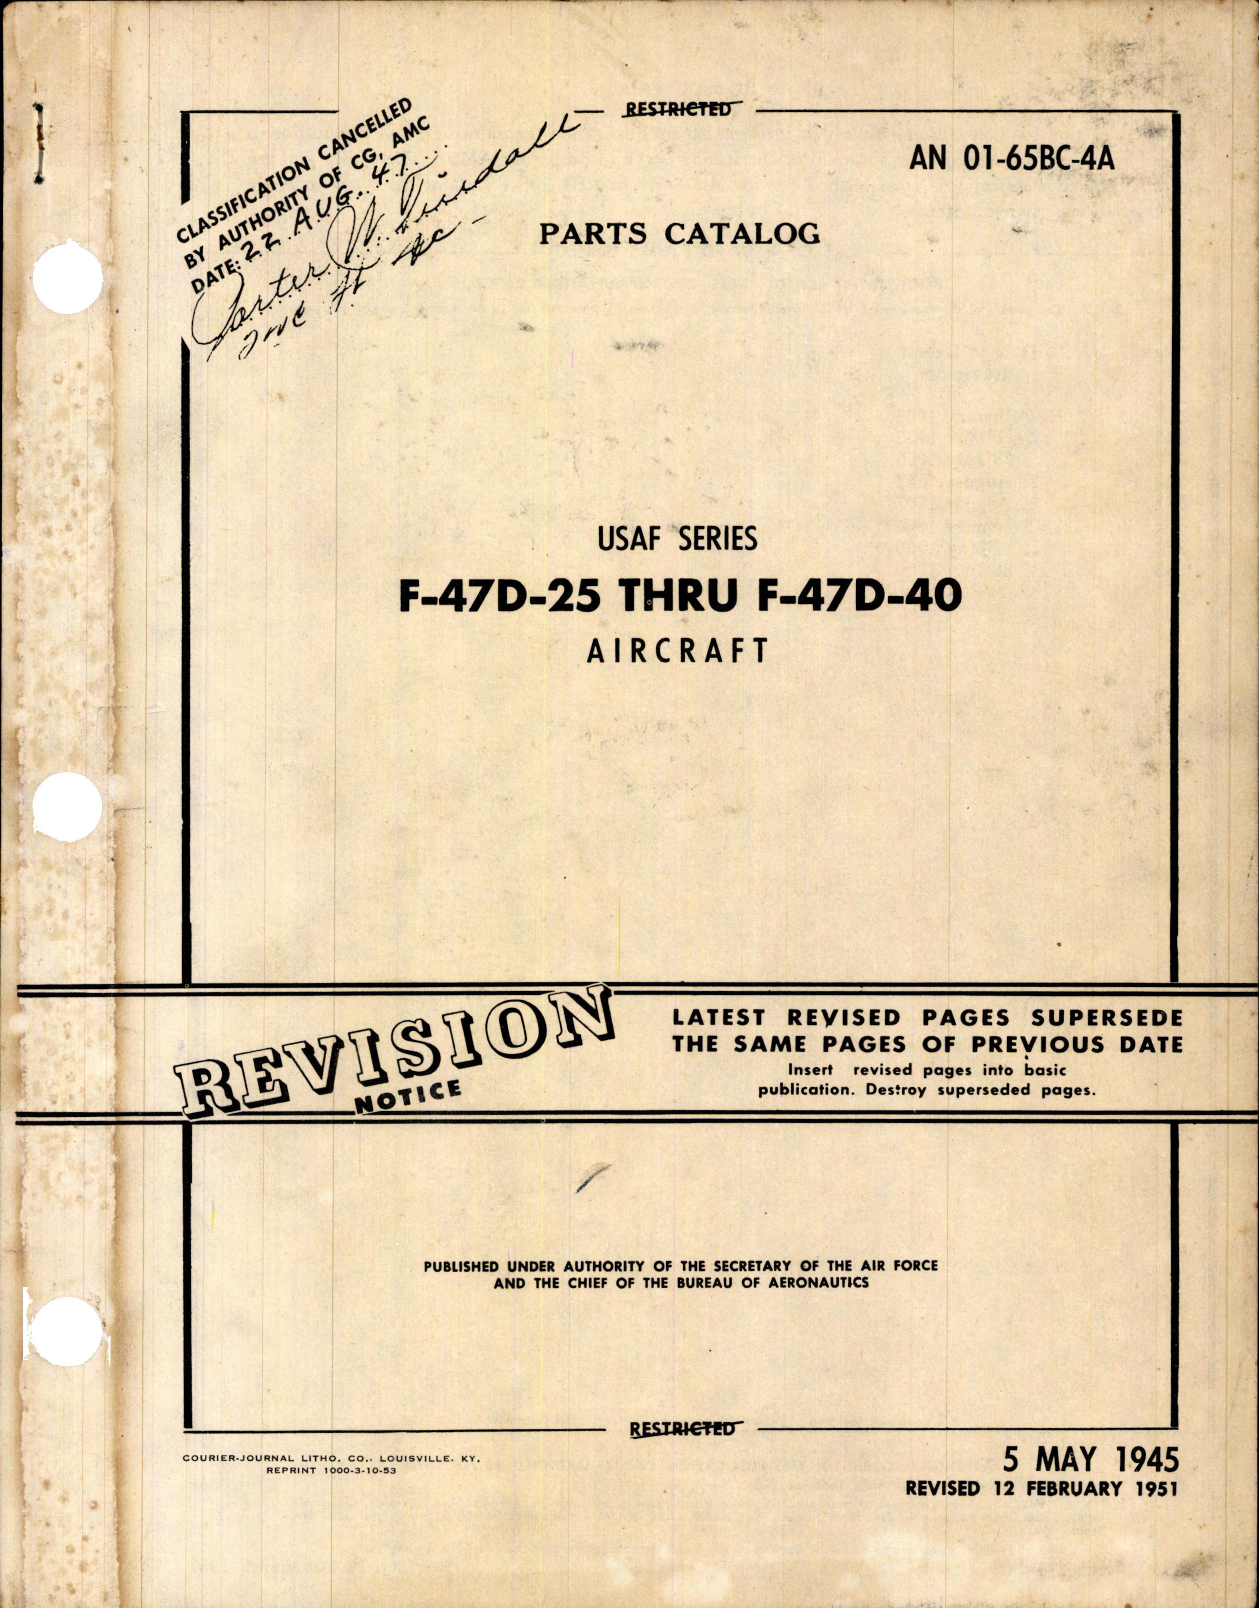 Sample page 1 from AirCorps Library document: Parts Catalog for F-47D-25 Thru F-47D-40